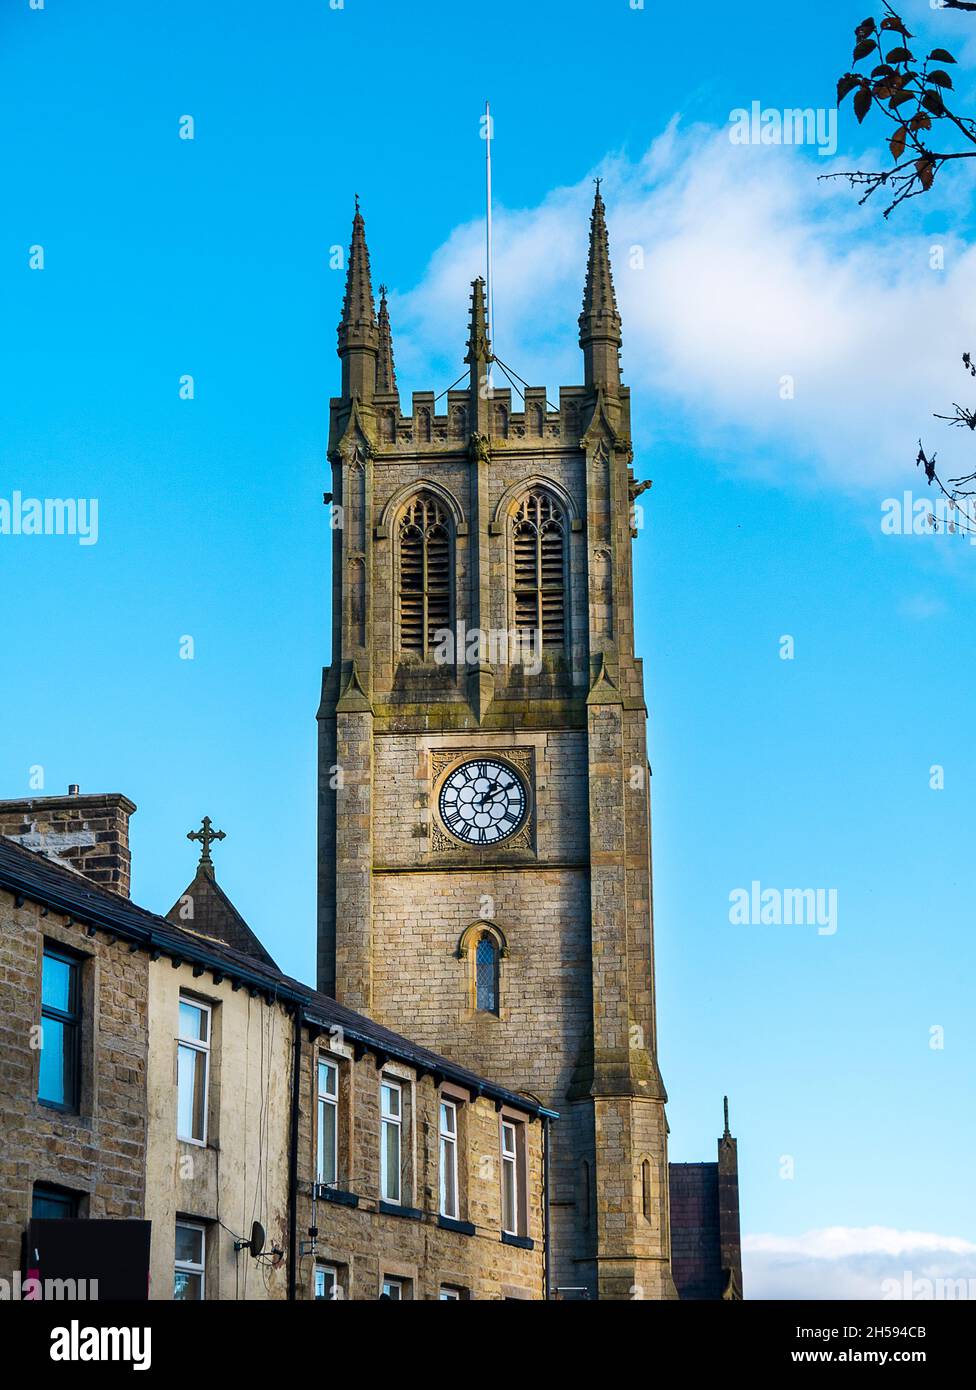 St Leonard's Parish Church in Padiham Lancashire dates from 1866 to 1869 It occupies the site of earlier churches dating back to 1451 or earlier Stock Photo